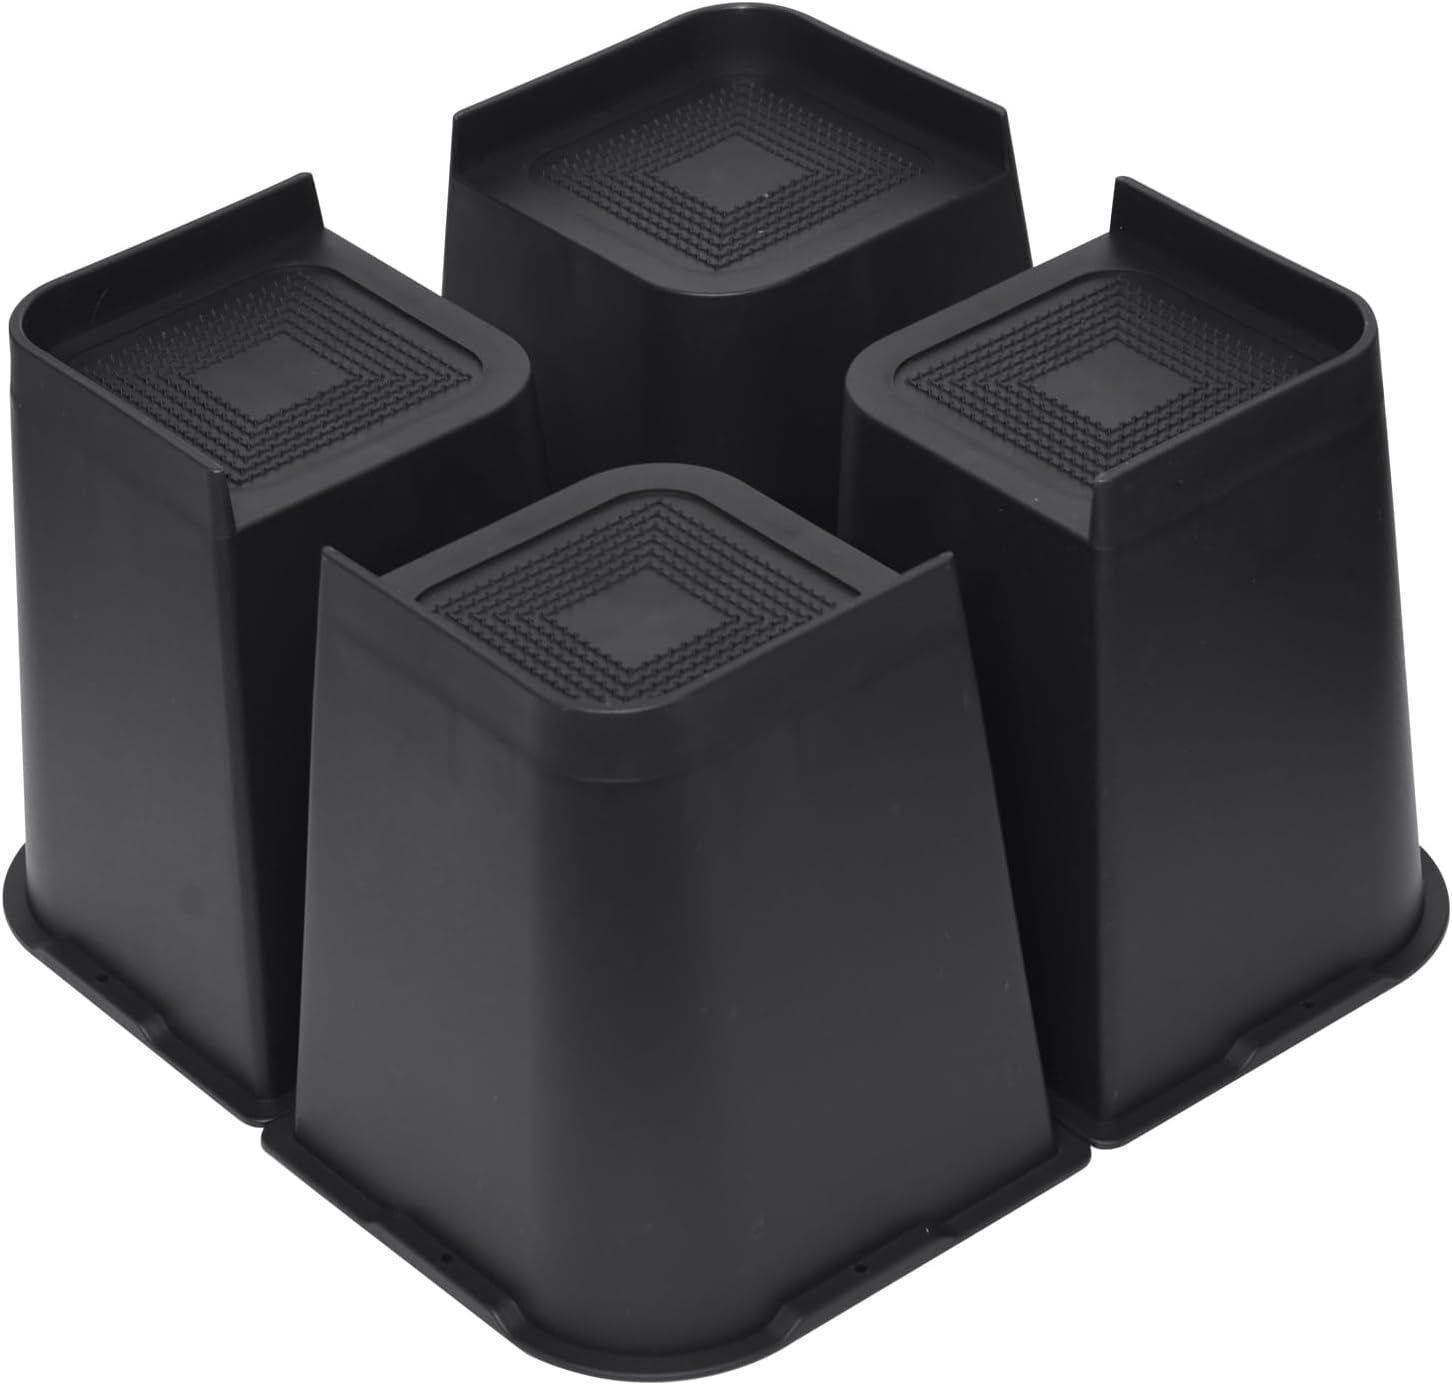 $46 Bed Risers 8 in 4 Pack